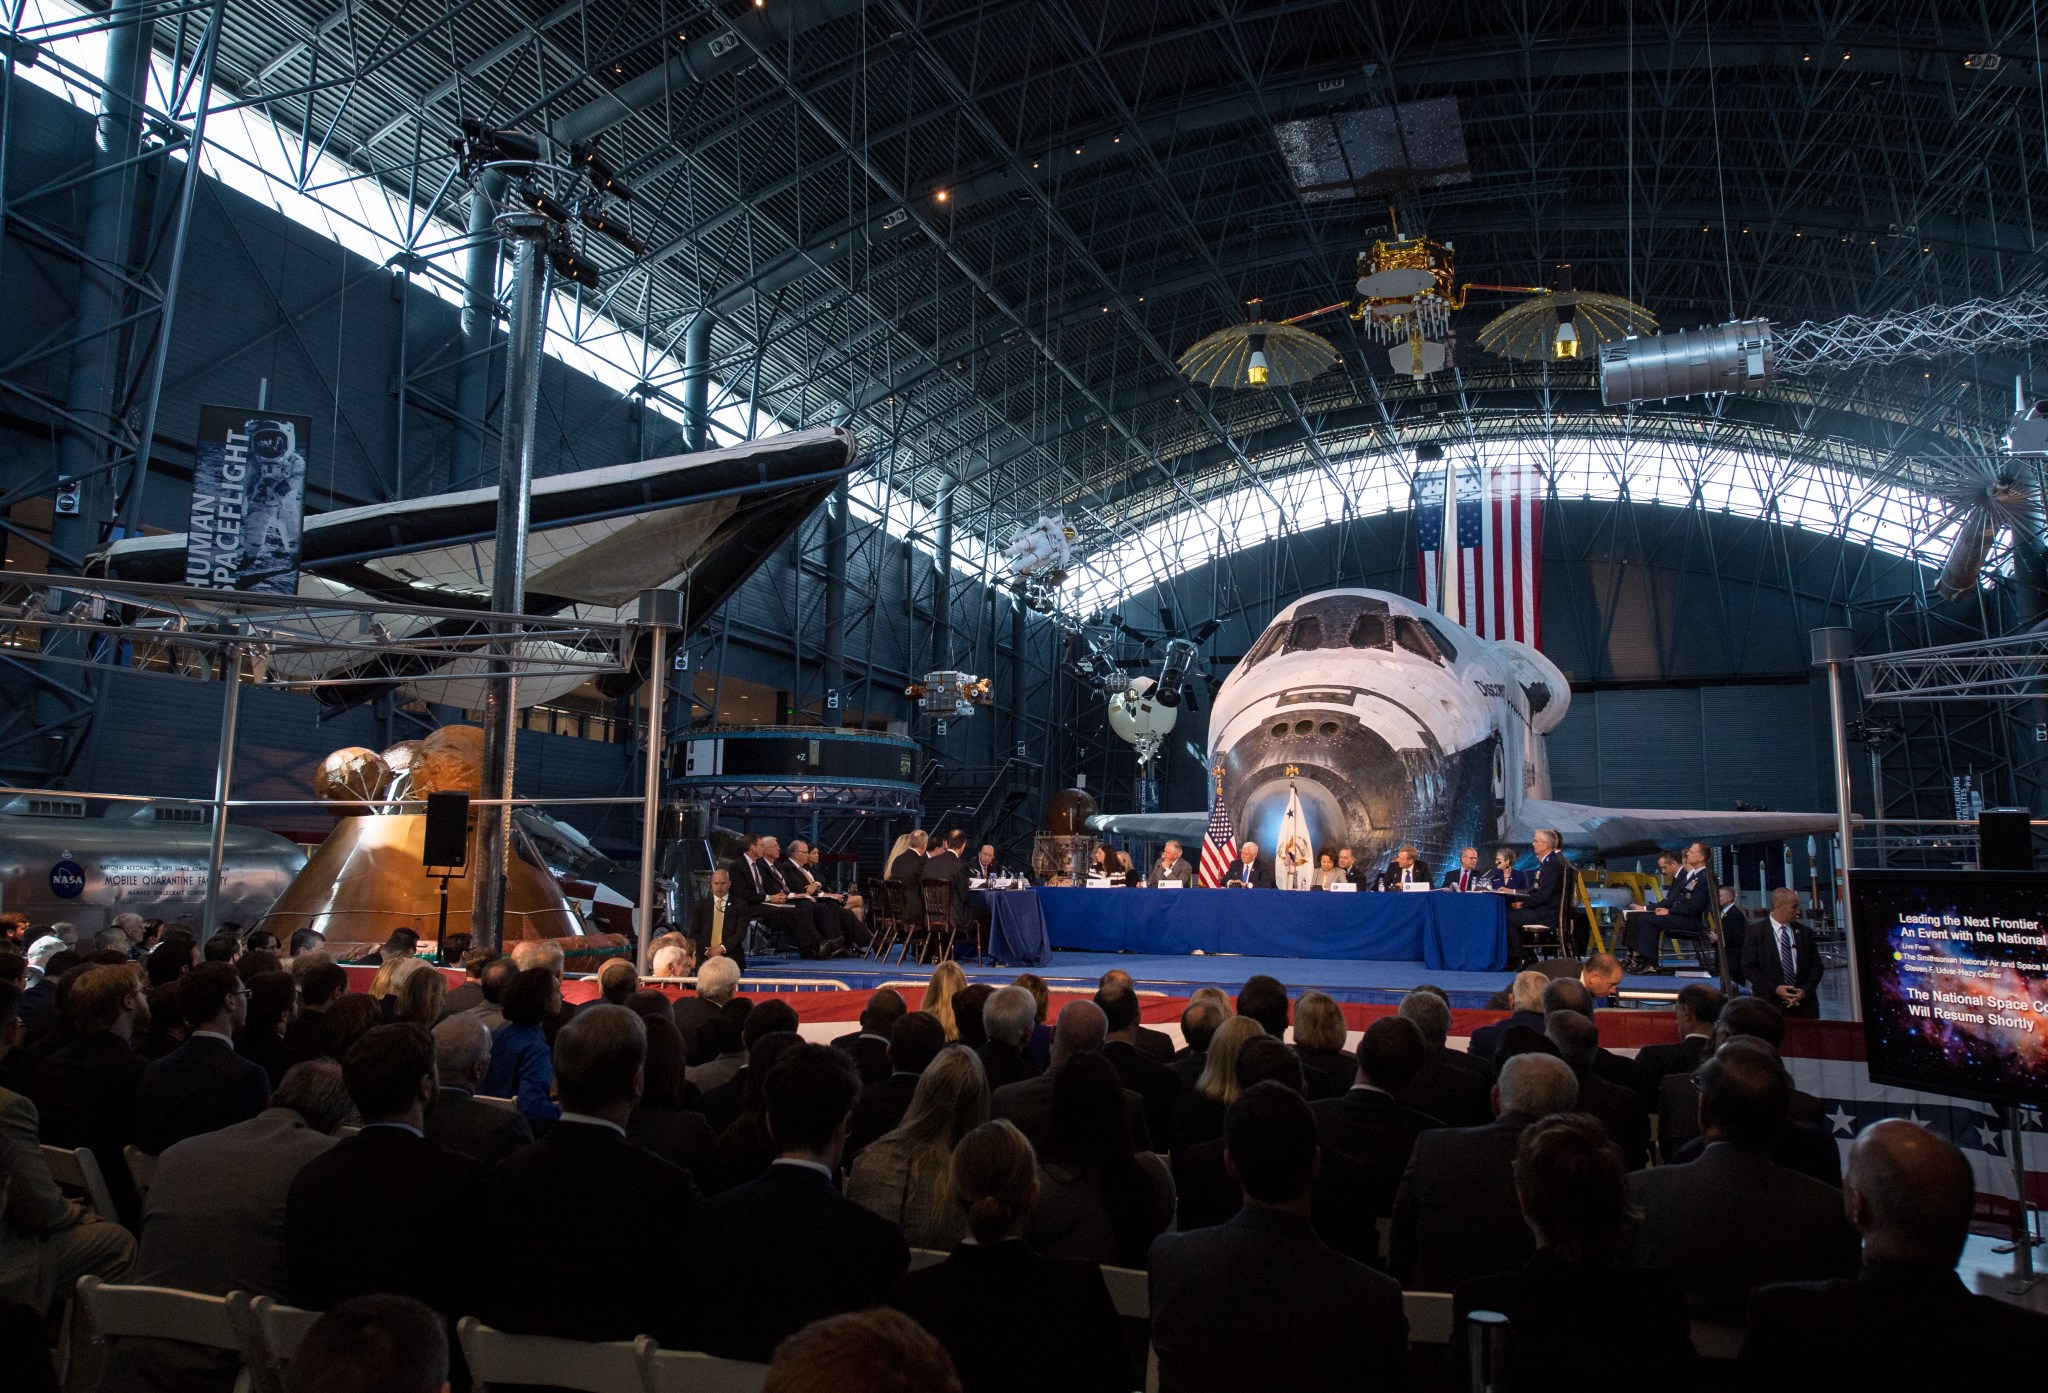 National Space Council meeting-Oct. 5, 2017